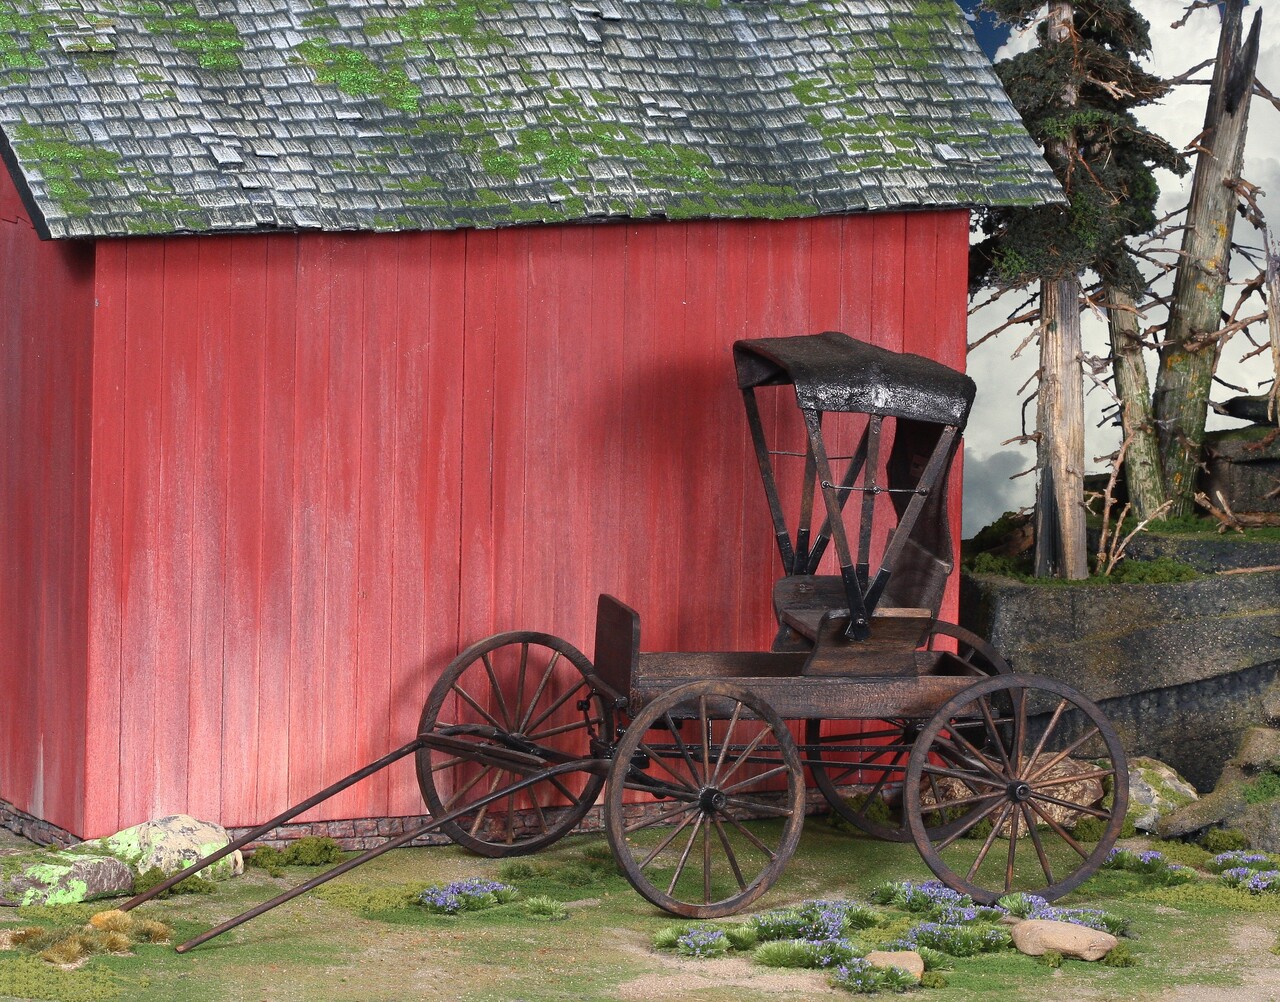 Buggy photographed with barn and landscape by brother Gene D. Austin